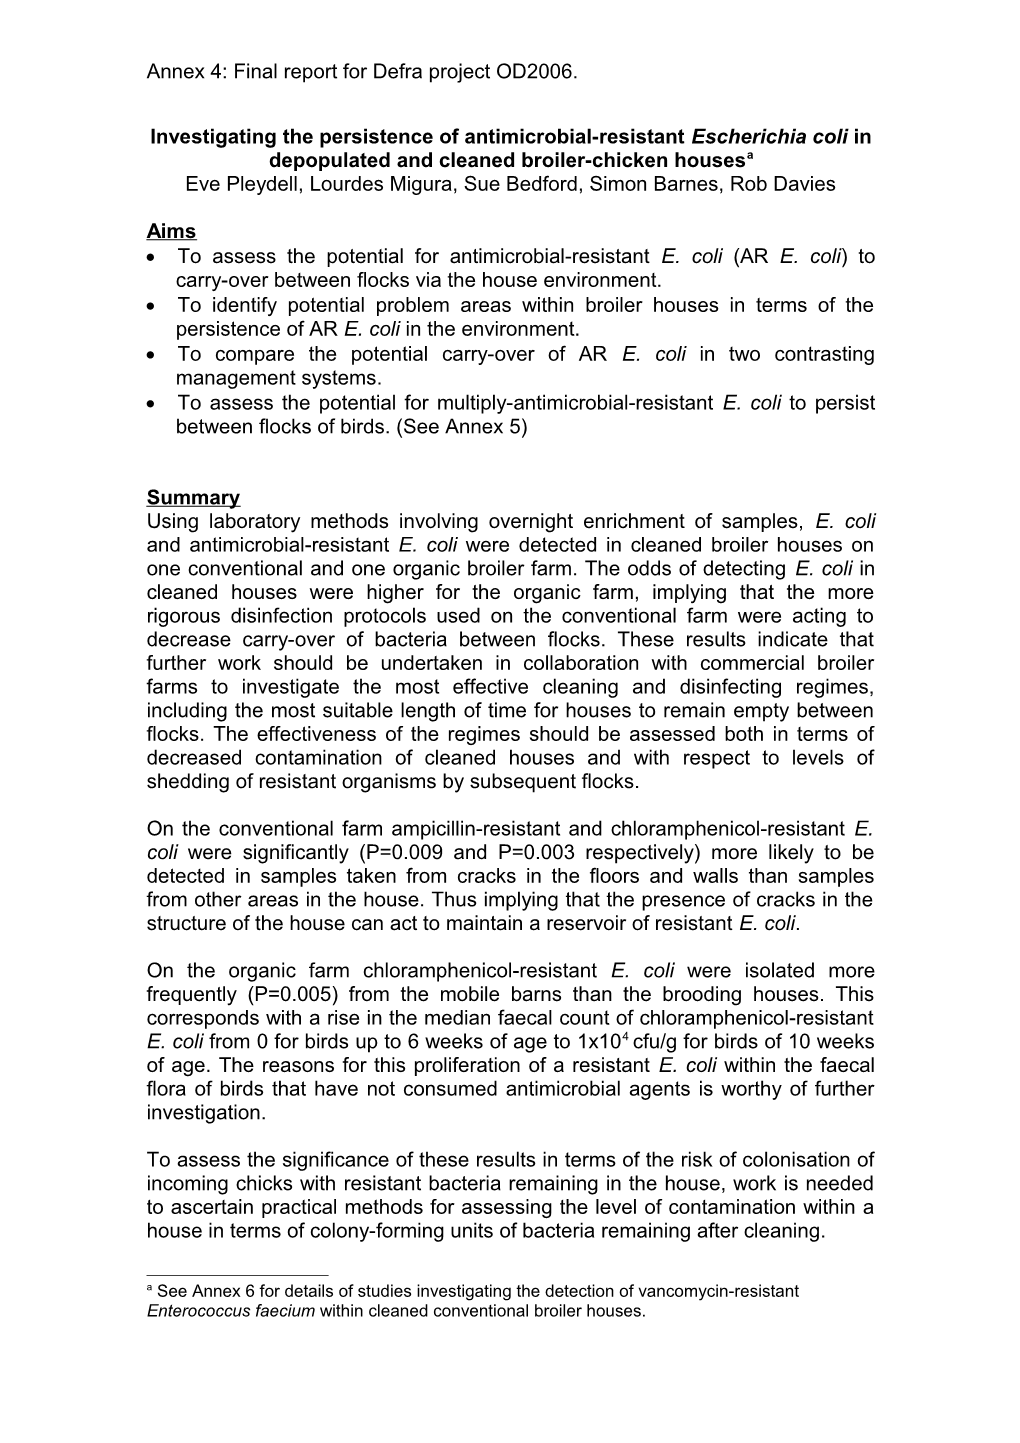 Annex 4: Final Report for Defra Project OD2006